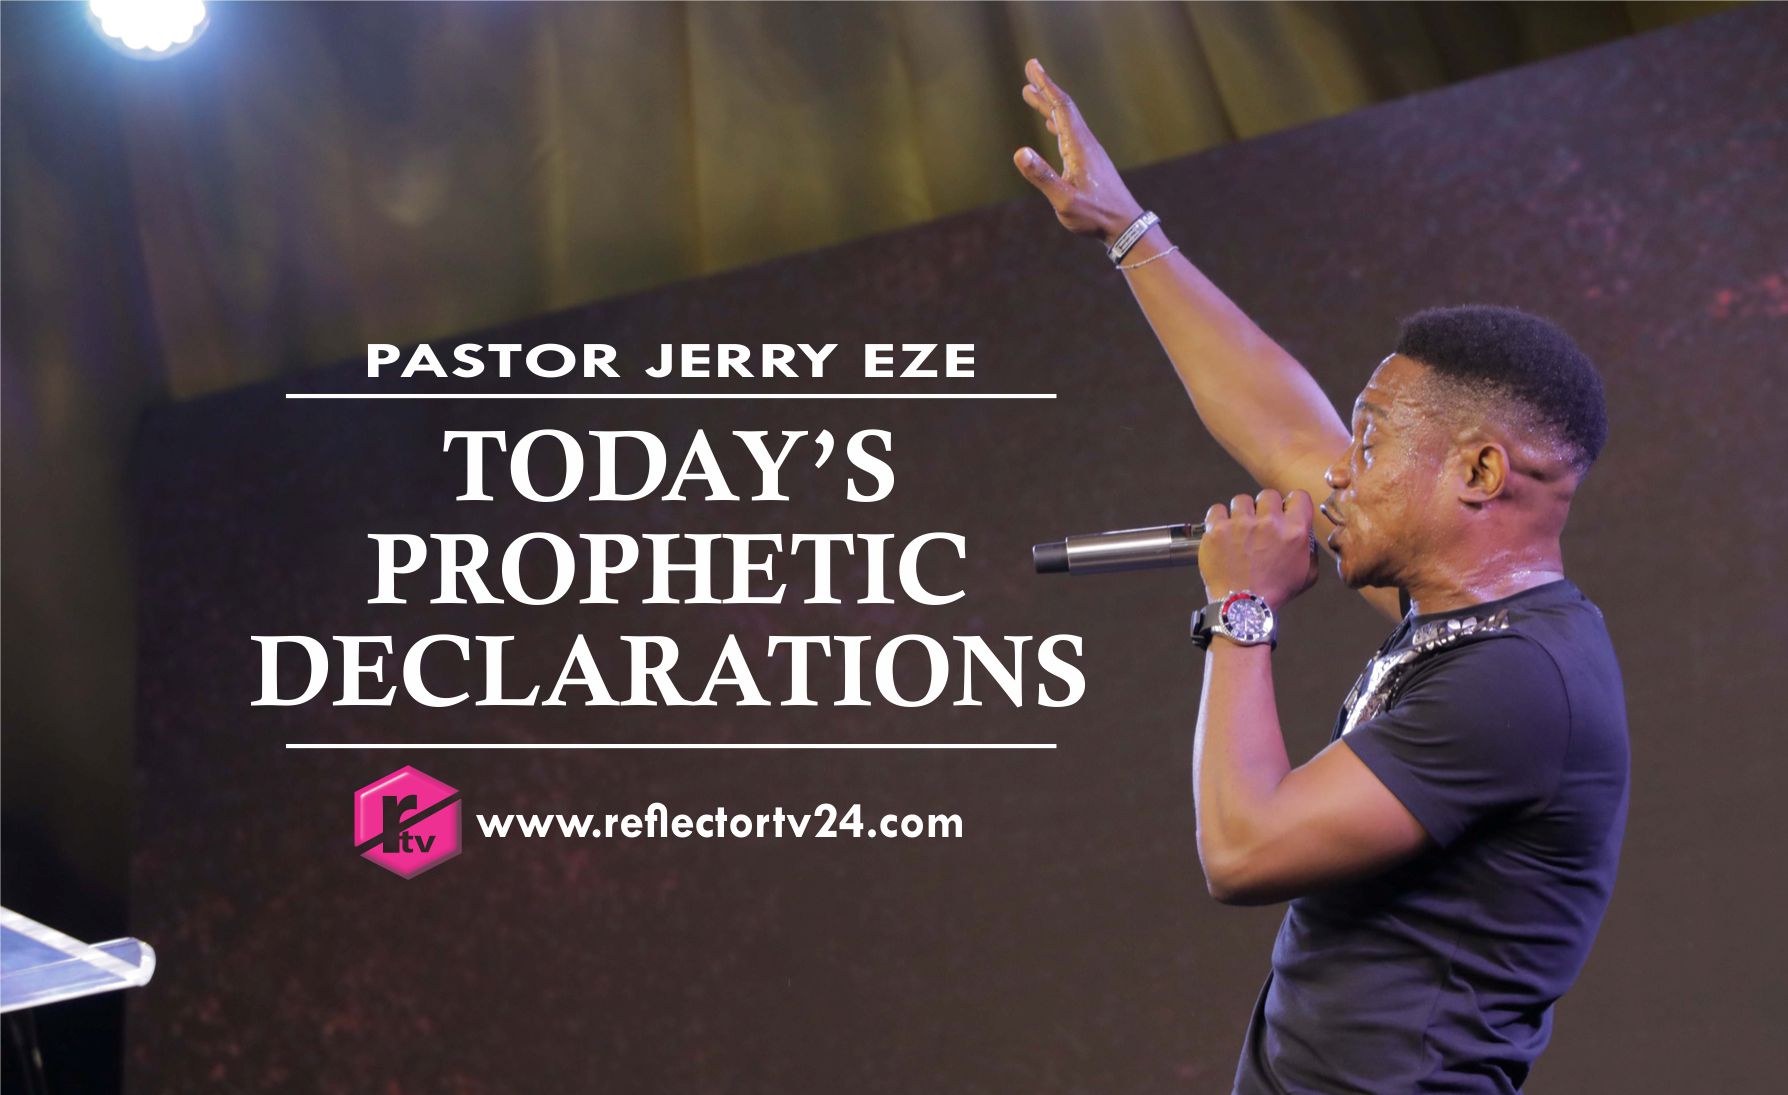 21 New Month Prophetic Declarations 1 August 2022 For Breakthrough With Pastor Jerry Eze